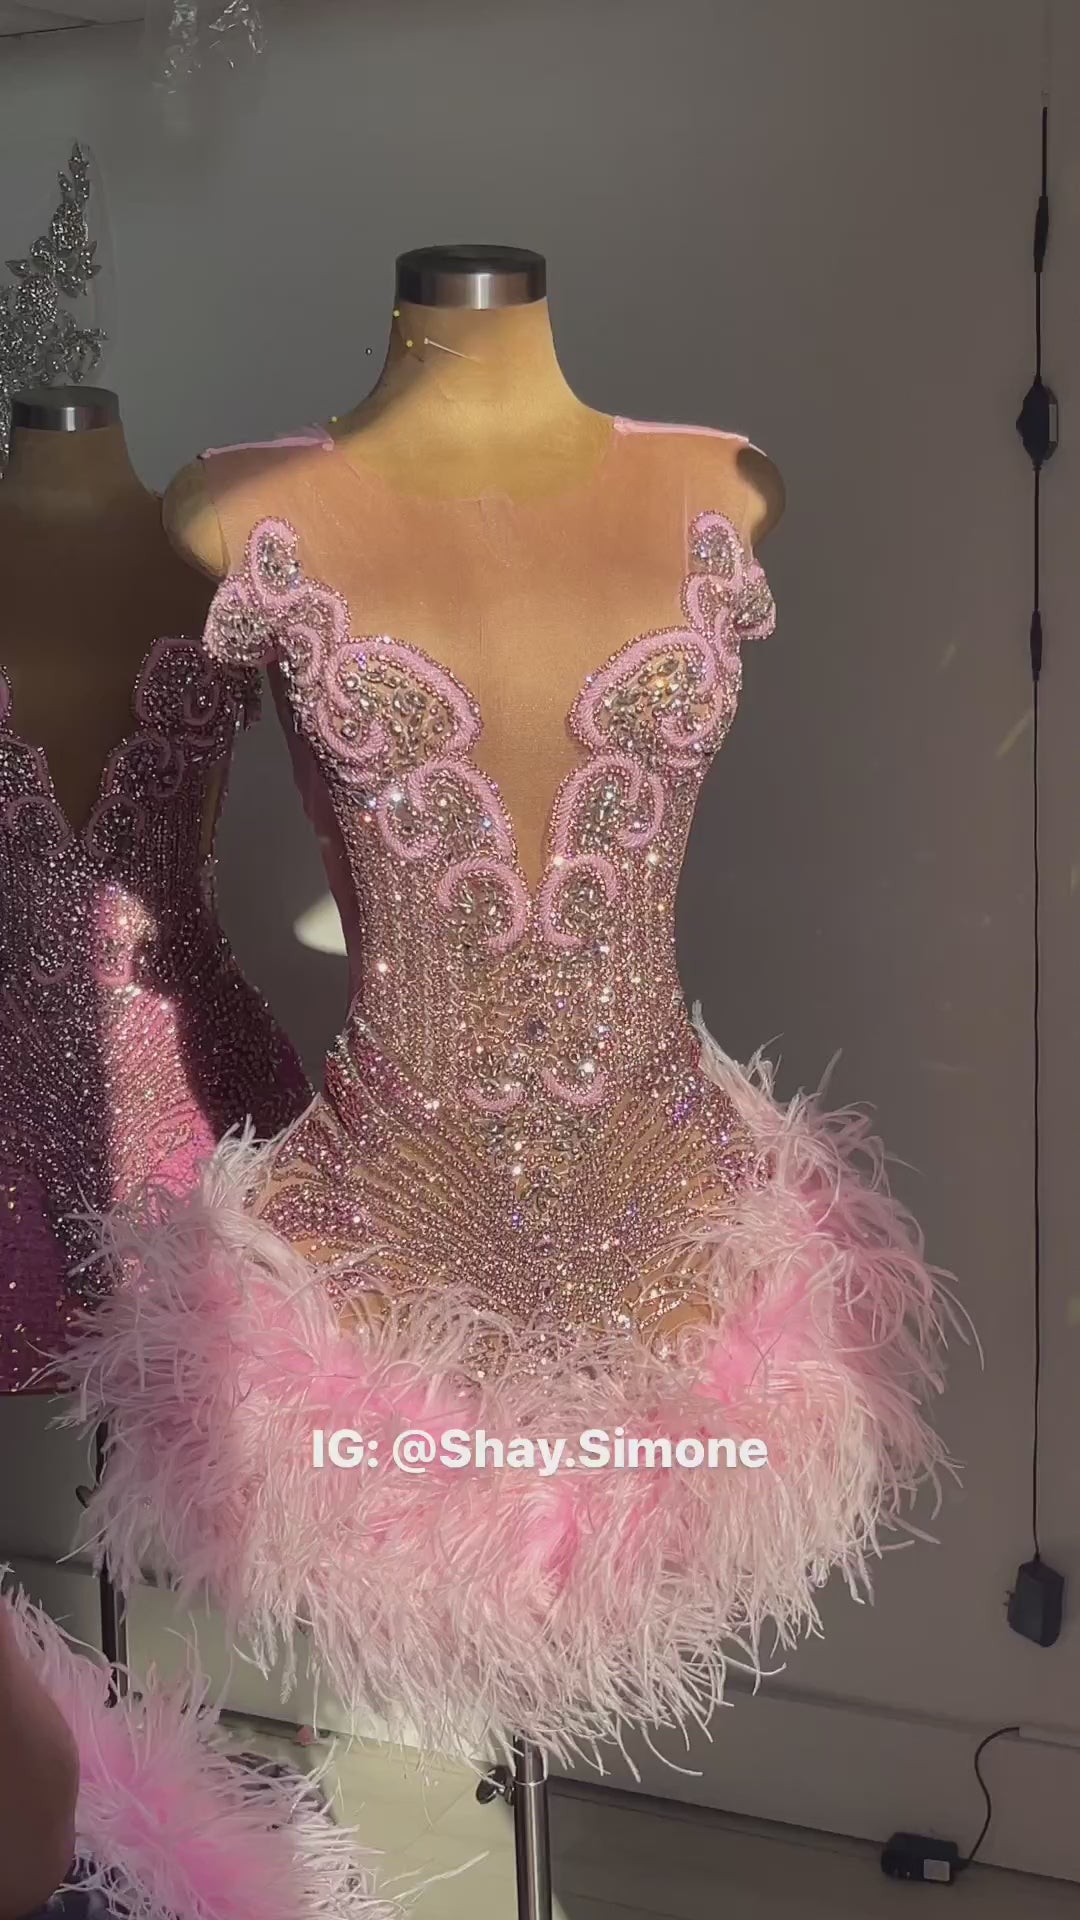 The Girl They LOVE TO HATE Custom Pink Rhinestone Dress with Feathers